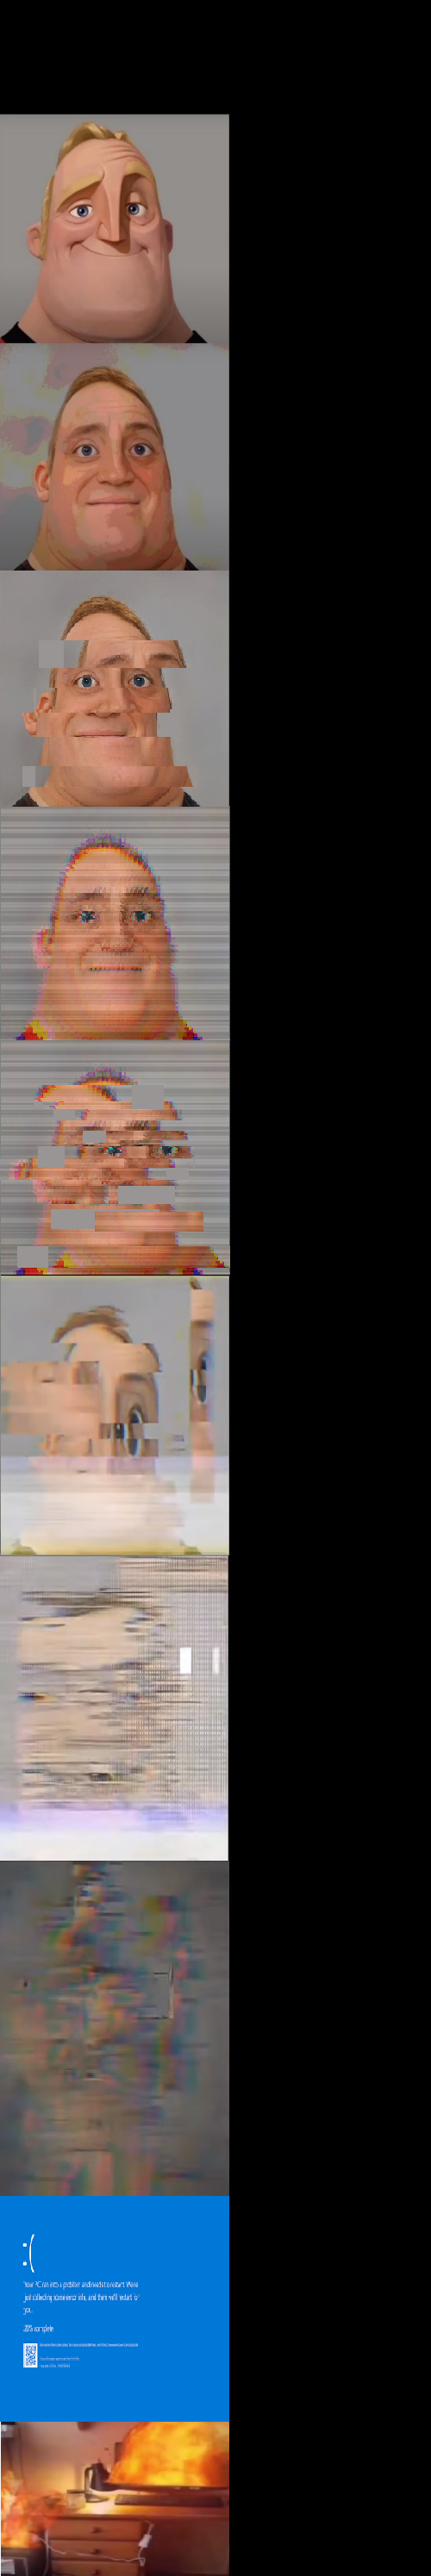 High Quality mr incredible becoming glitched template Blank Meme Template